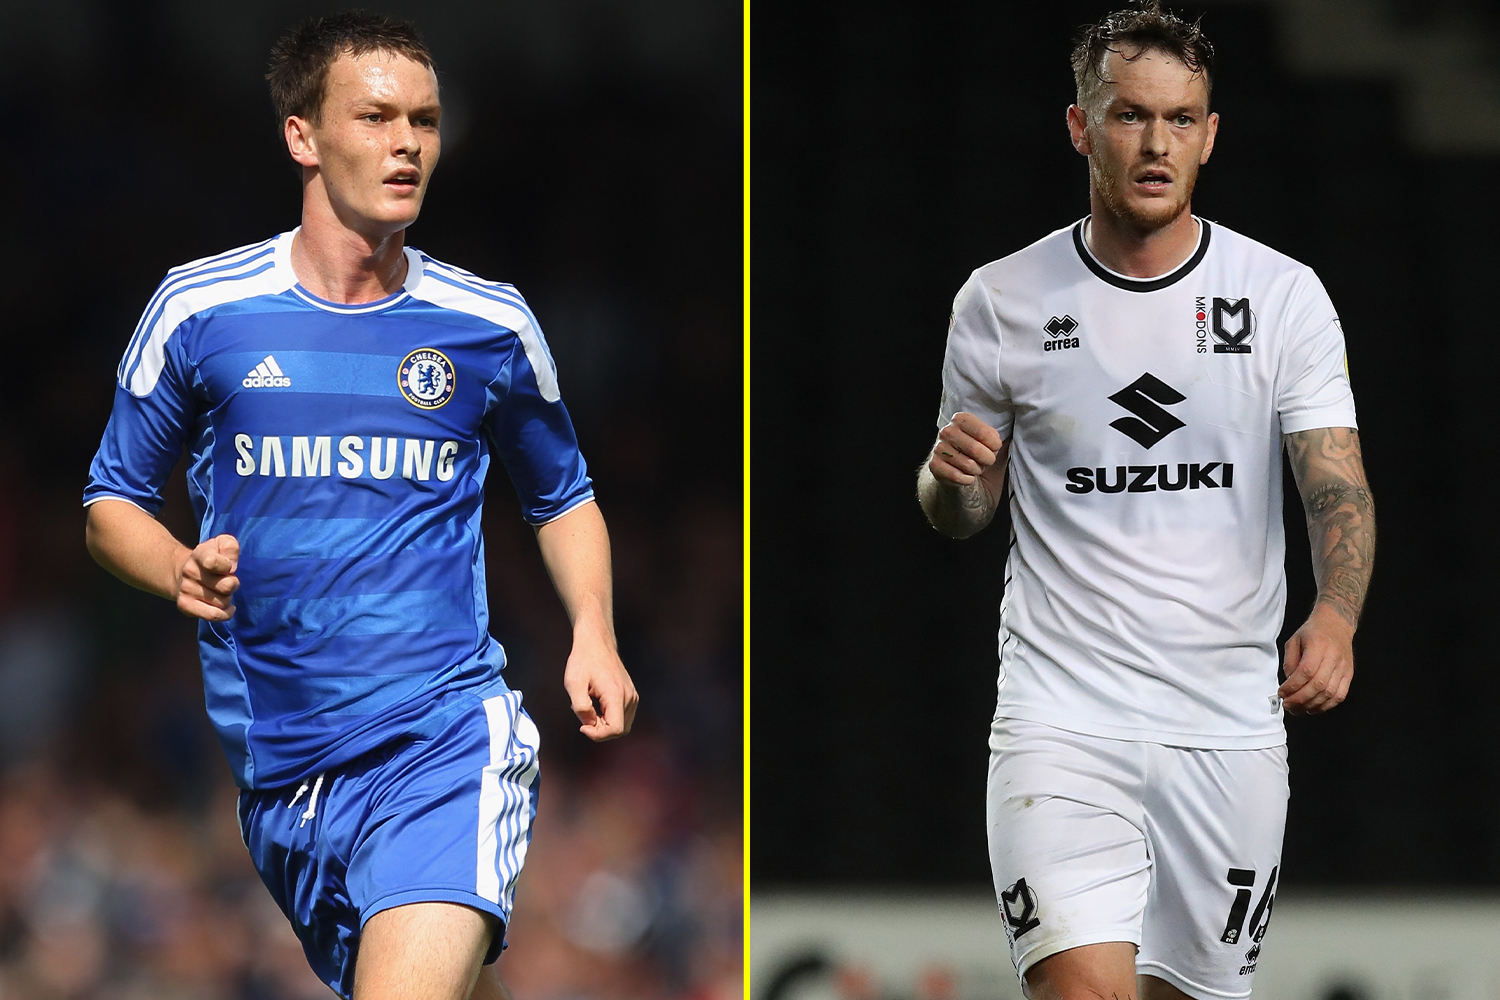 Former Chelsea starlet Josh McEachran who snubbed Real Madrid now unemployed after MK Dons release midfielder